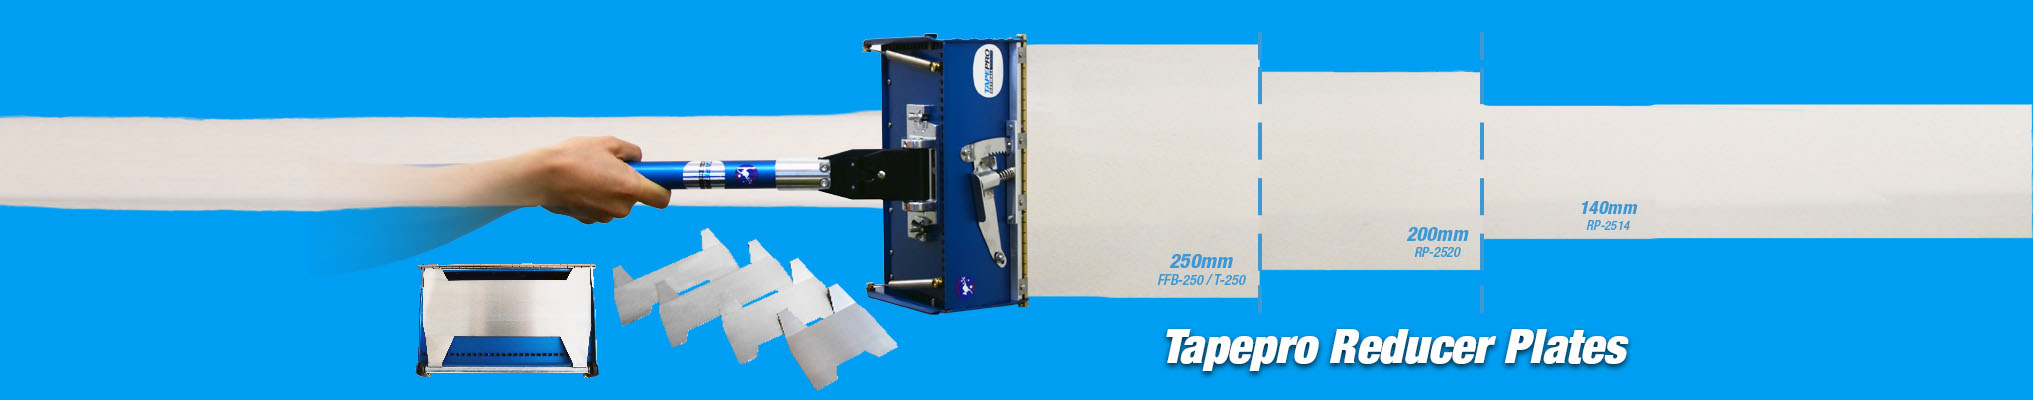 Tapepro Reducer Plates